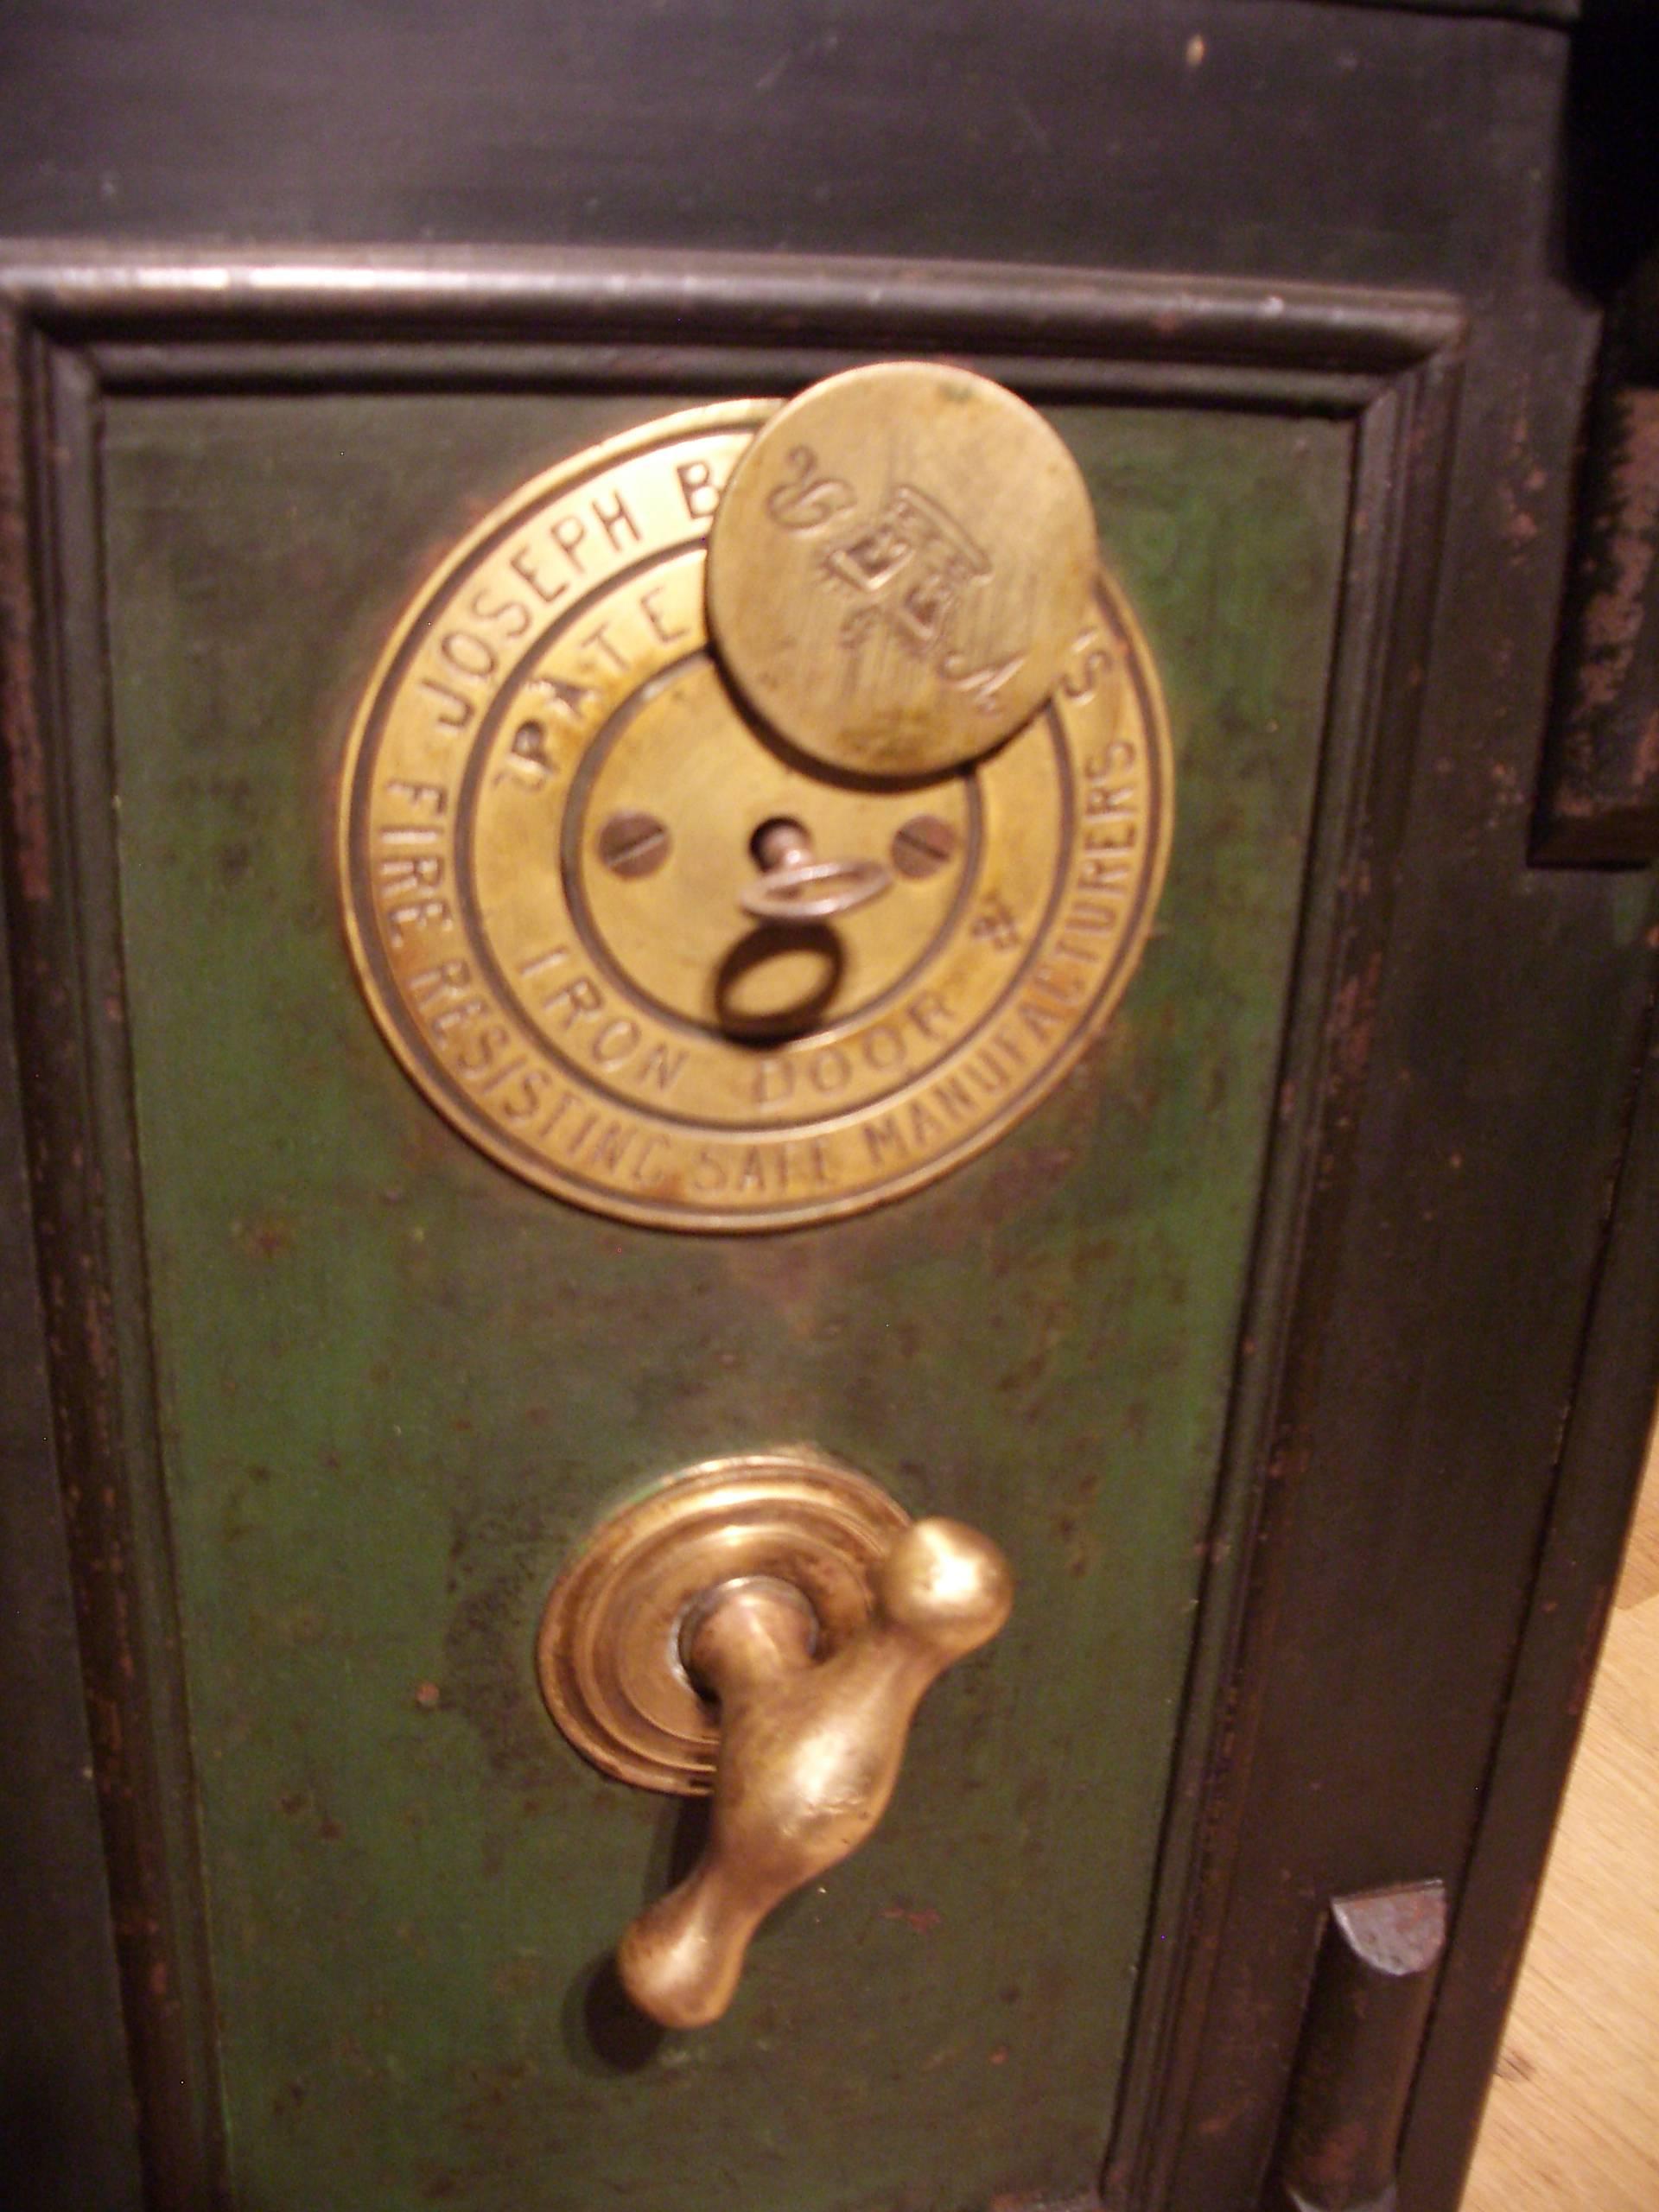 Beautiful antique safe from England in perfect and original condition. Nice compact model. In good working condition with key.

Origin: England.
Maker: Joseph Bates & Son.
Period: 1890-1900.

Size: W. 35cm, D.33cm, H. 51cm.